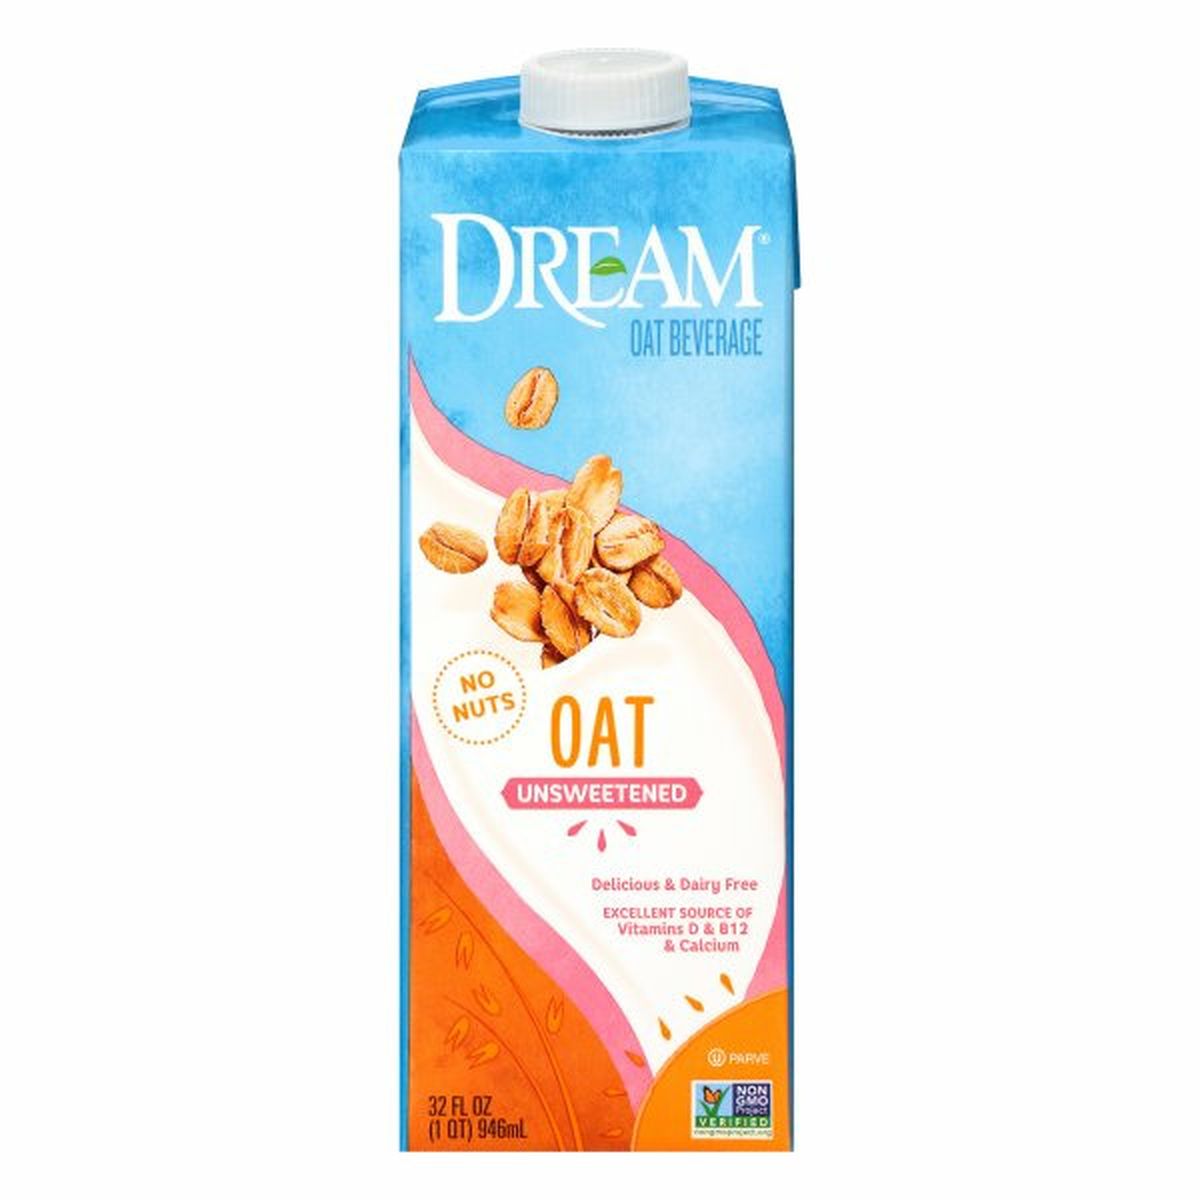 Calories in Dream Oat Beverage, Unsweetened